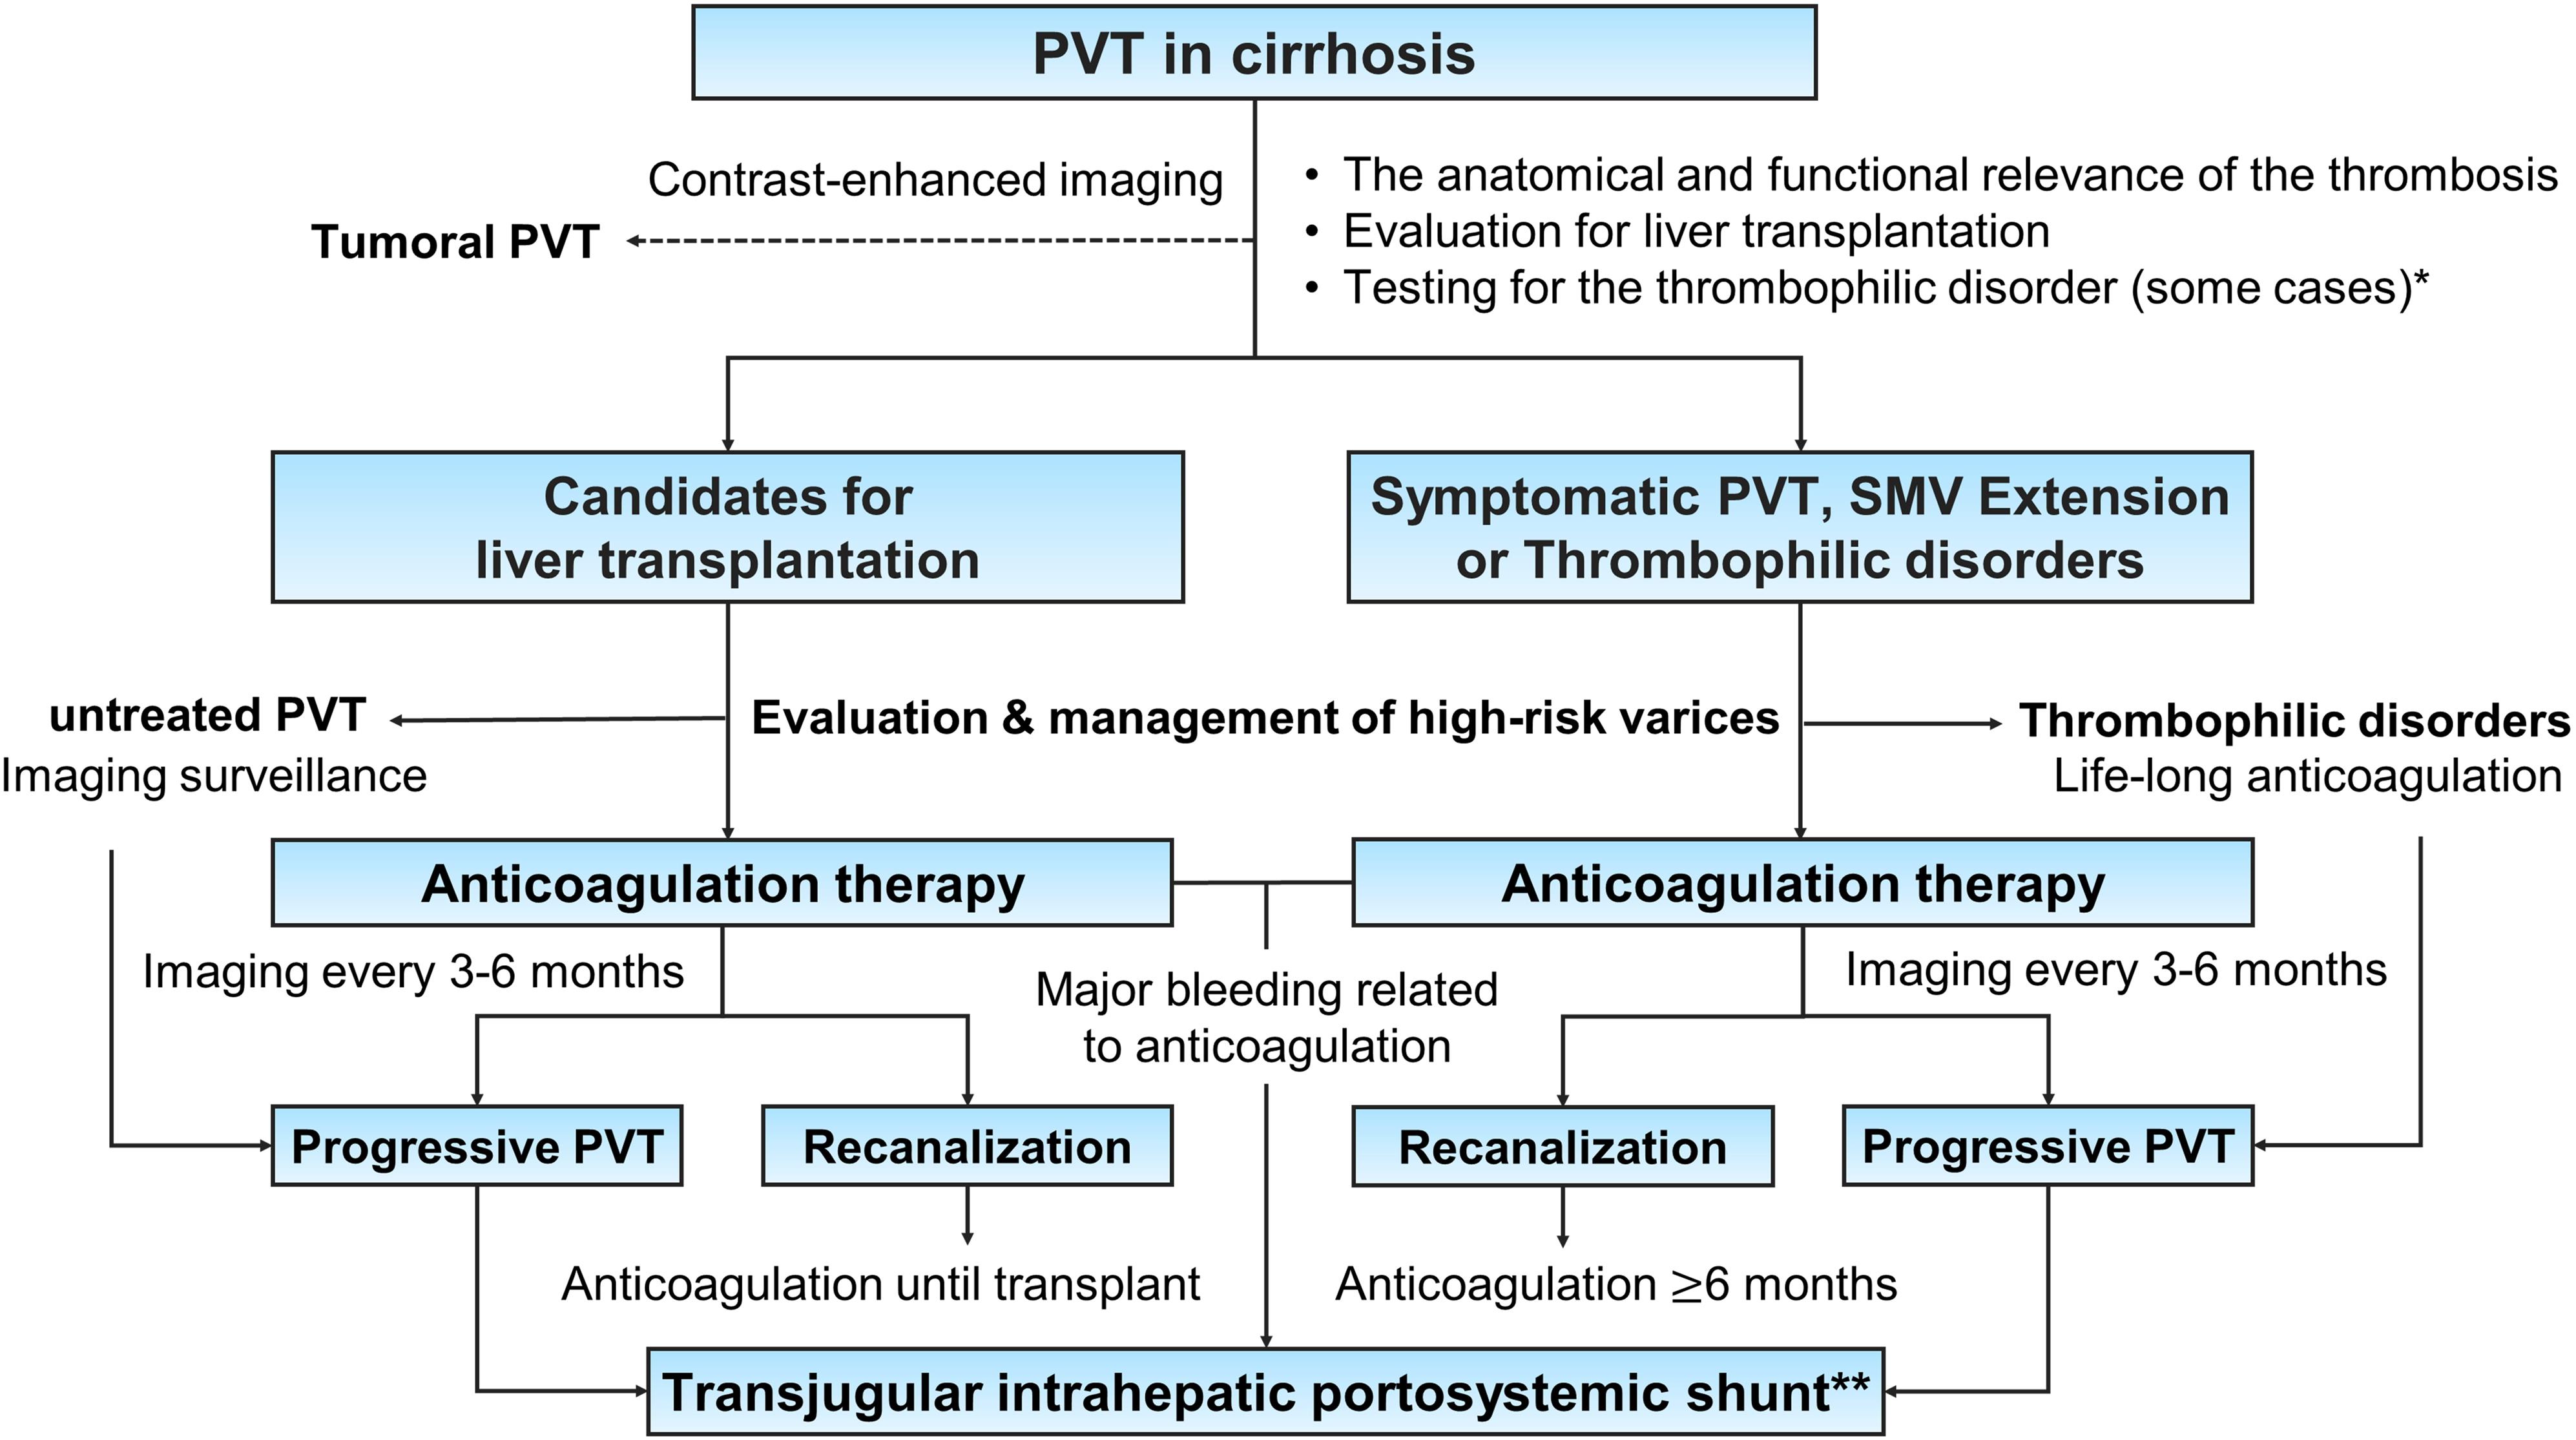 <bold>Potential algorithm for the management of nontumoral portal vein thrombosis (PVT) in liver cirrhosis.</bold> *Lupus anticoagulant, anticardiolipin, anti-β2-glycoprotein 1 antibody, factor V Leiden, 20210A prothrombin gene mutation, methylene tetrahydrofolate reductase gene mutation, JAK2 V617F mutation and work-up for paroxysmal nocturnal hemoglobinuria. **Limited technical feasibility in low-volume center, superior mesenteric vein (SMV) thrombosis and portal cavernoma.